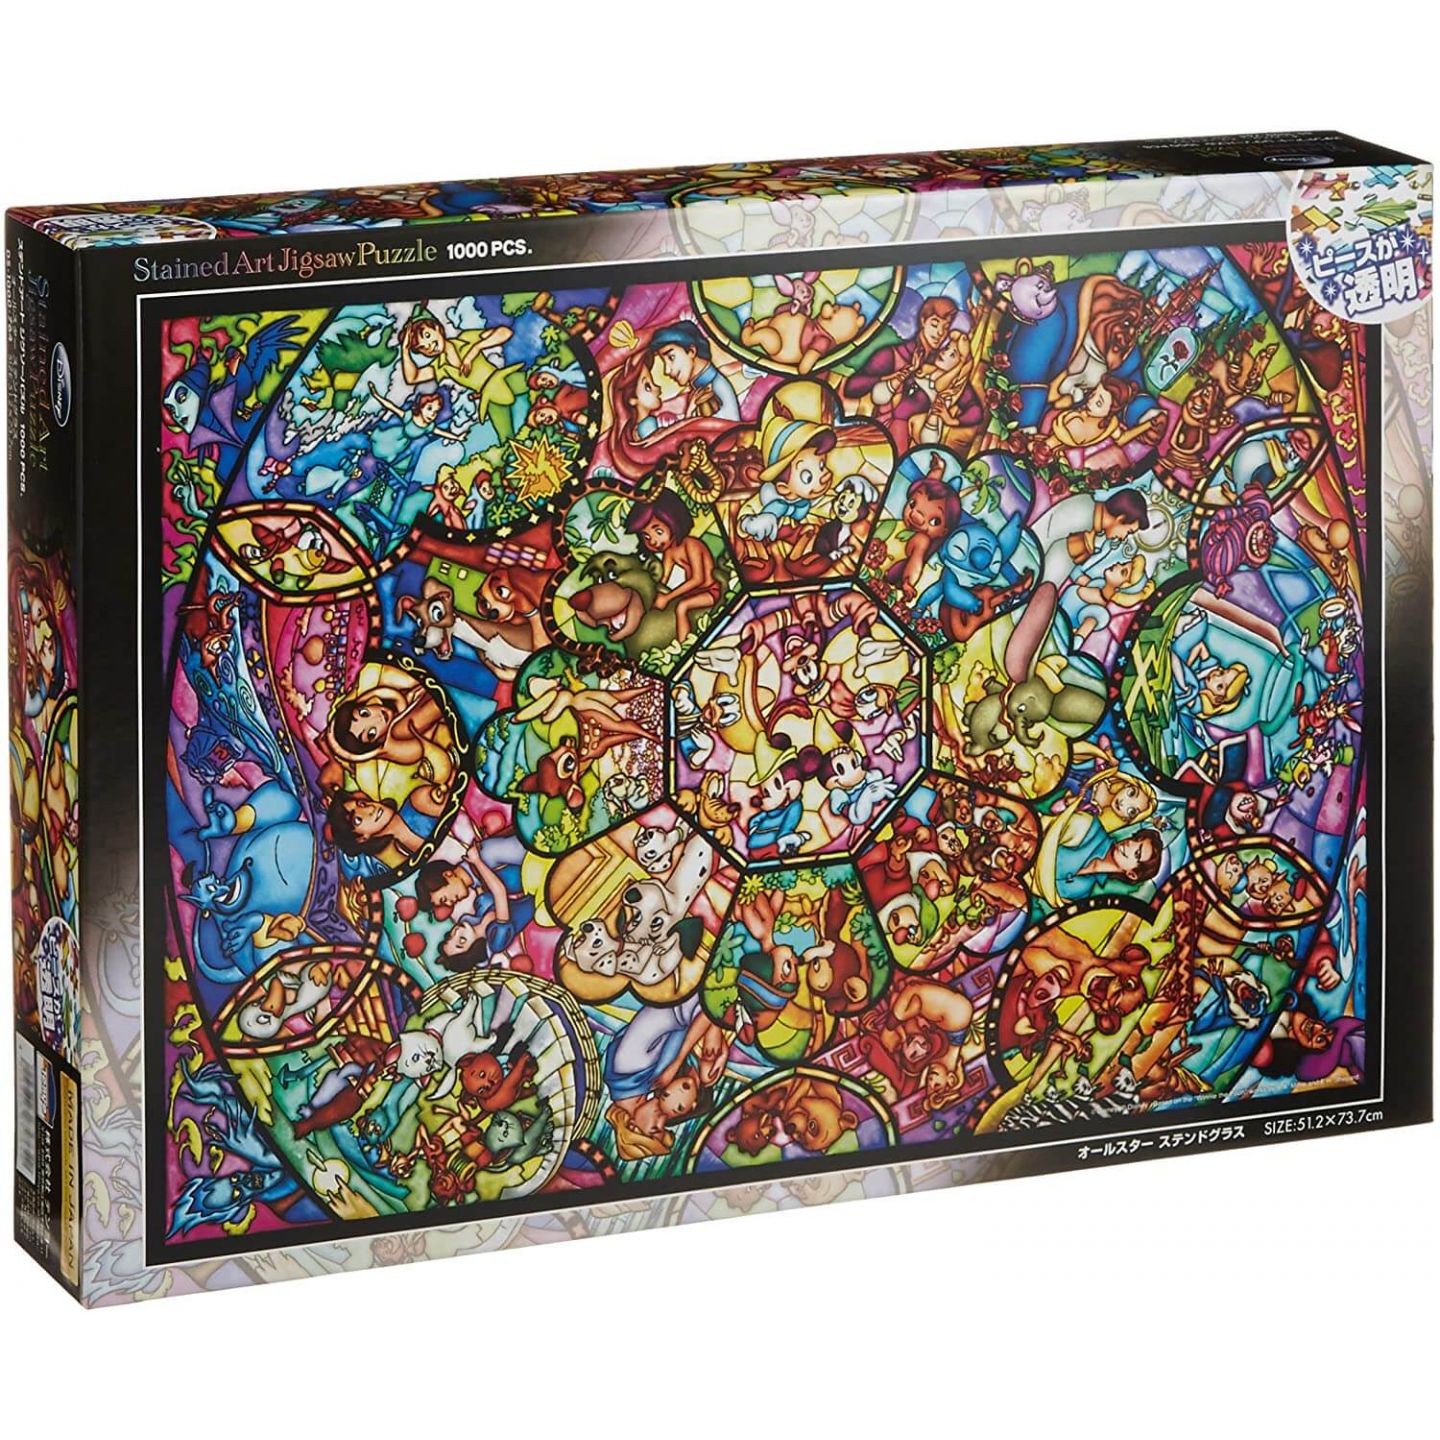 Alice in Wonderland Story JAPAN IMPORT TENYO Stained Art Jigsaw Puzzle 